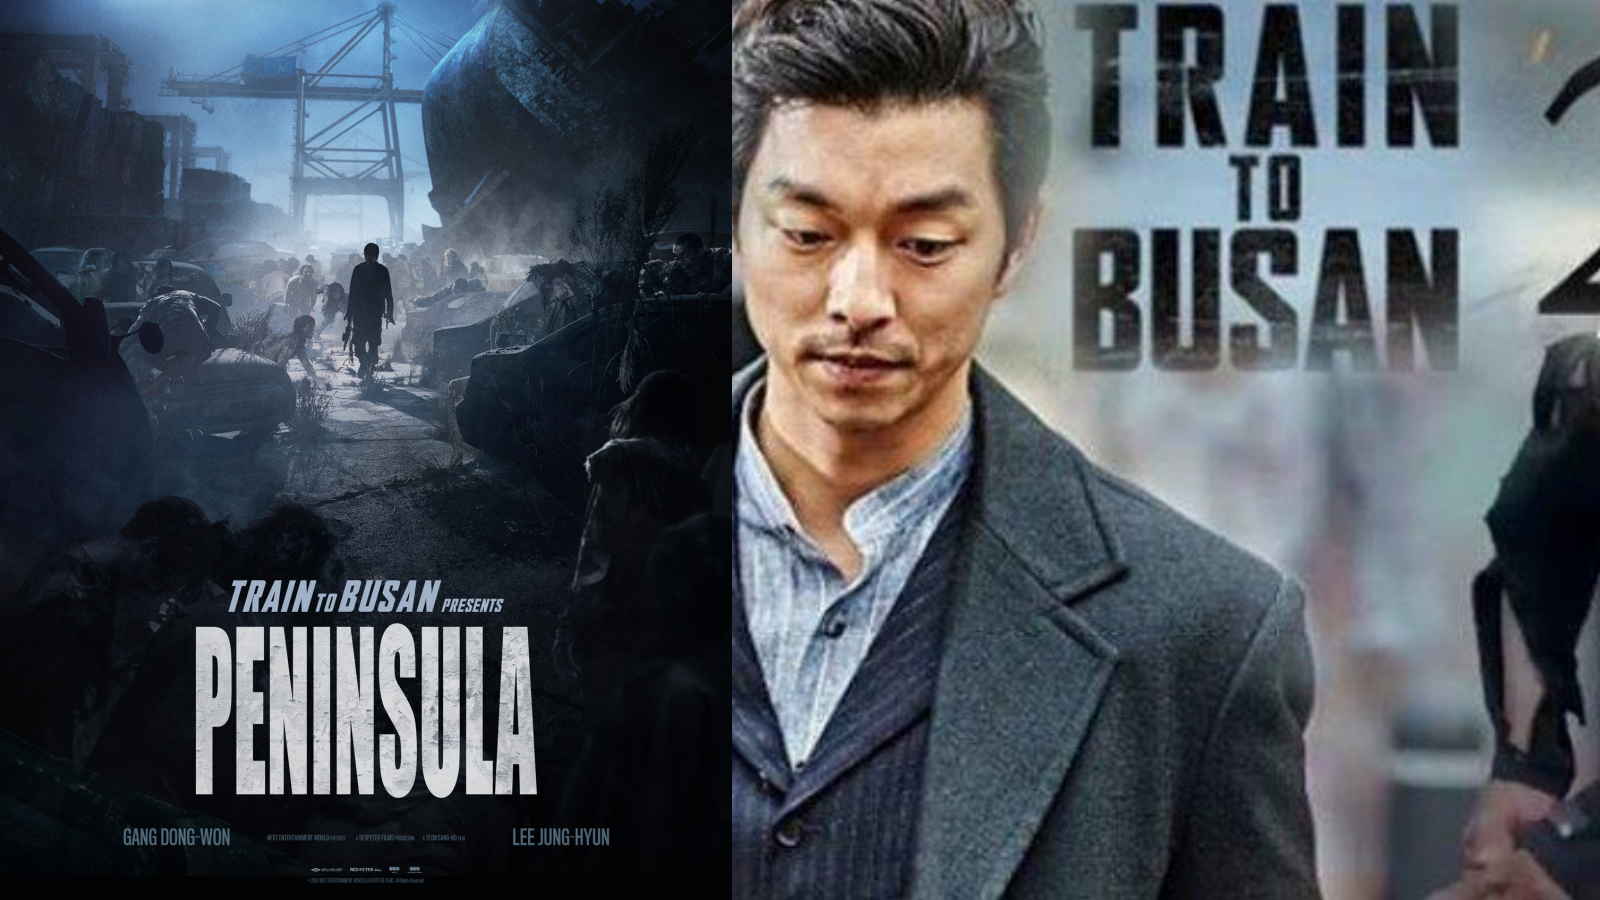 Peninsula takes place four years after train to busan as the characters fig...